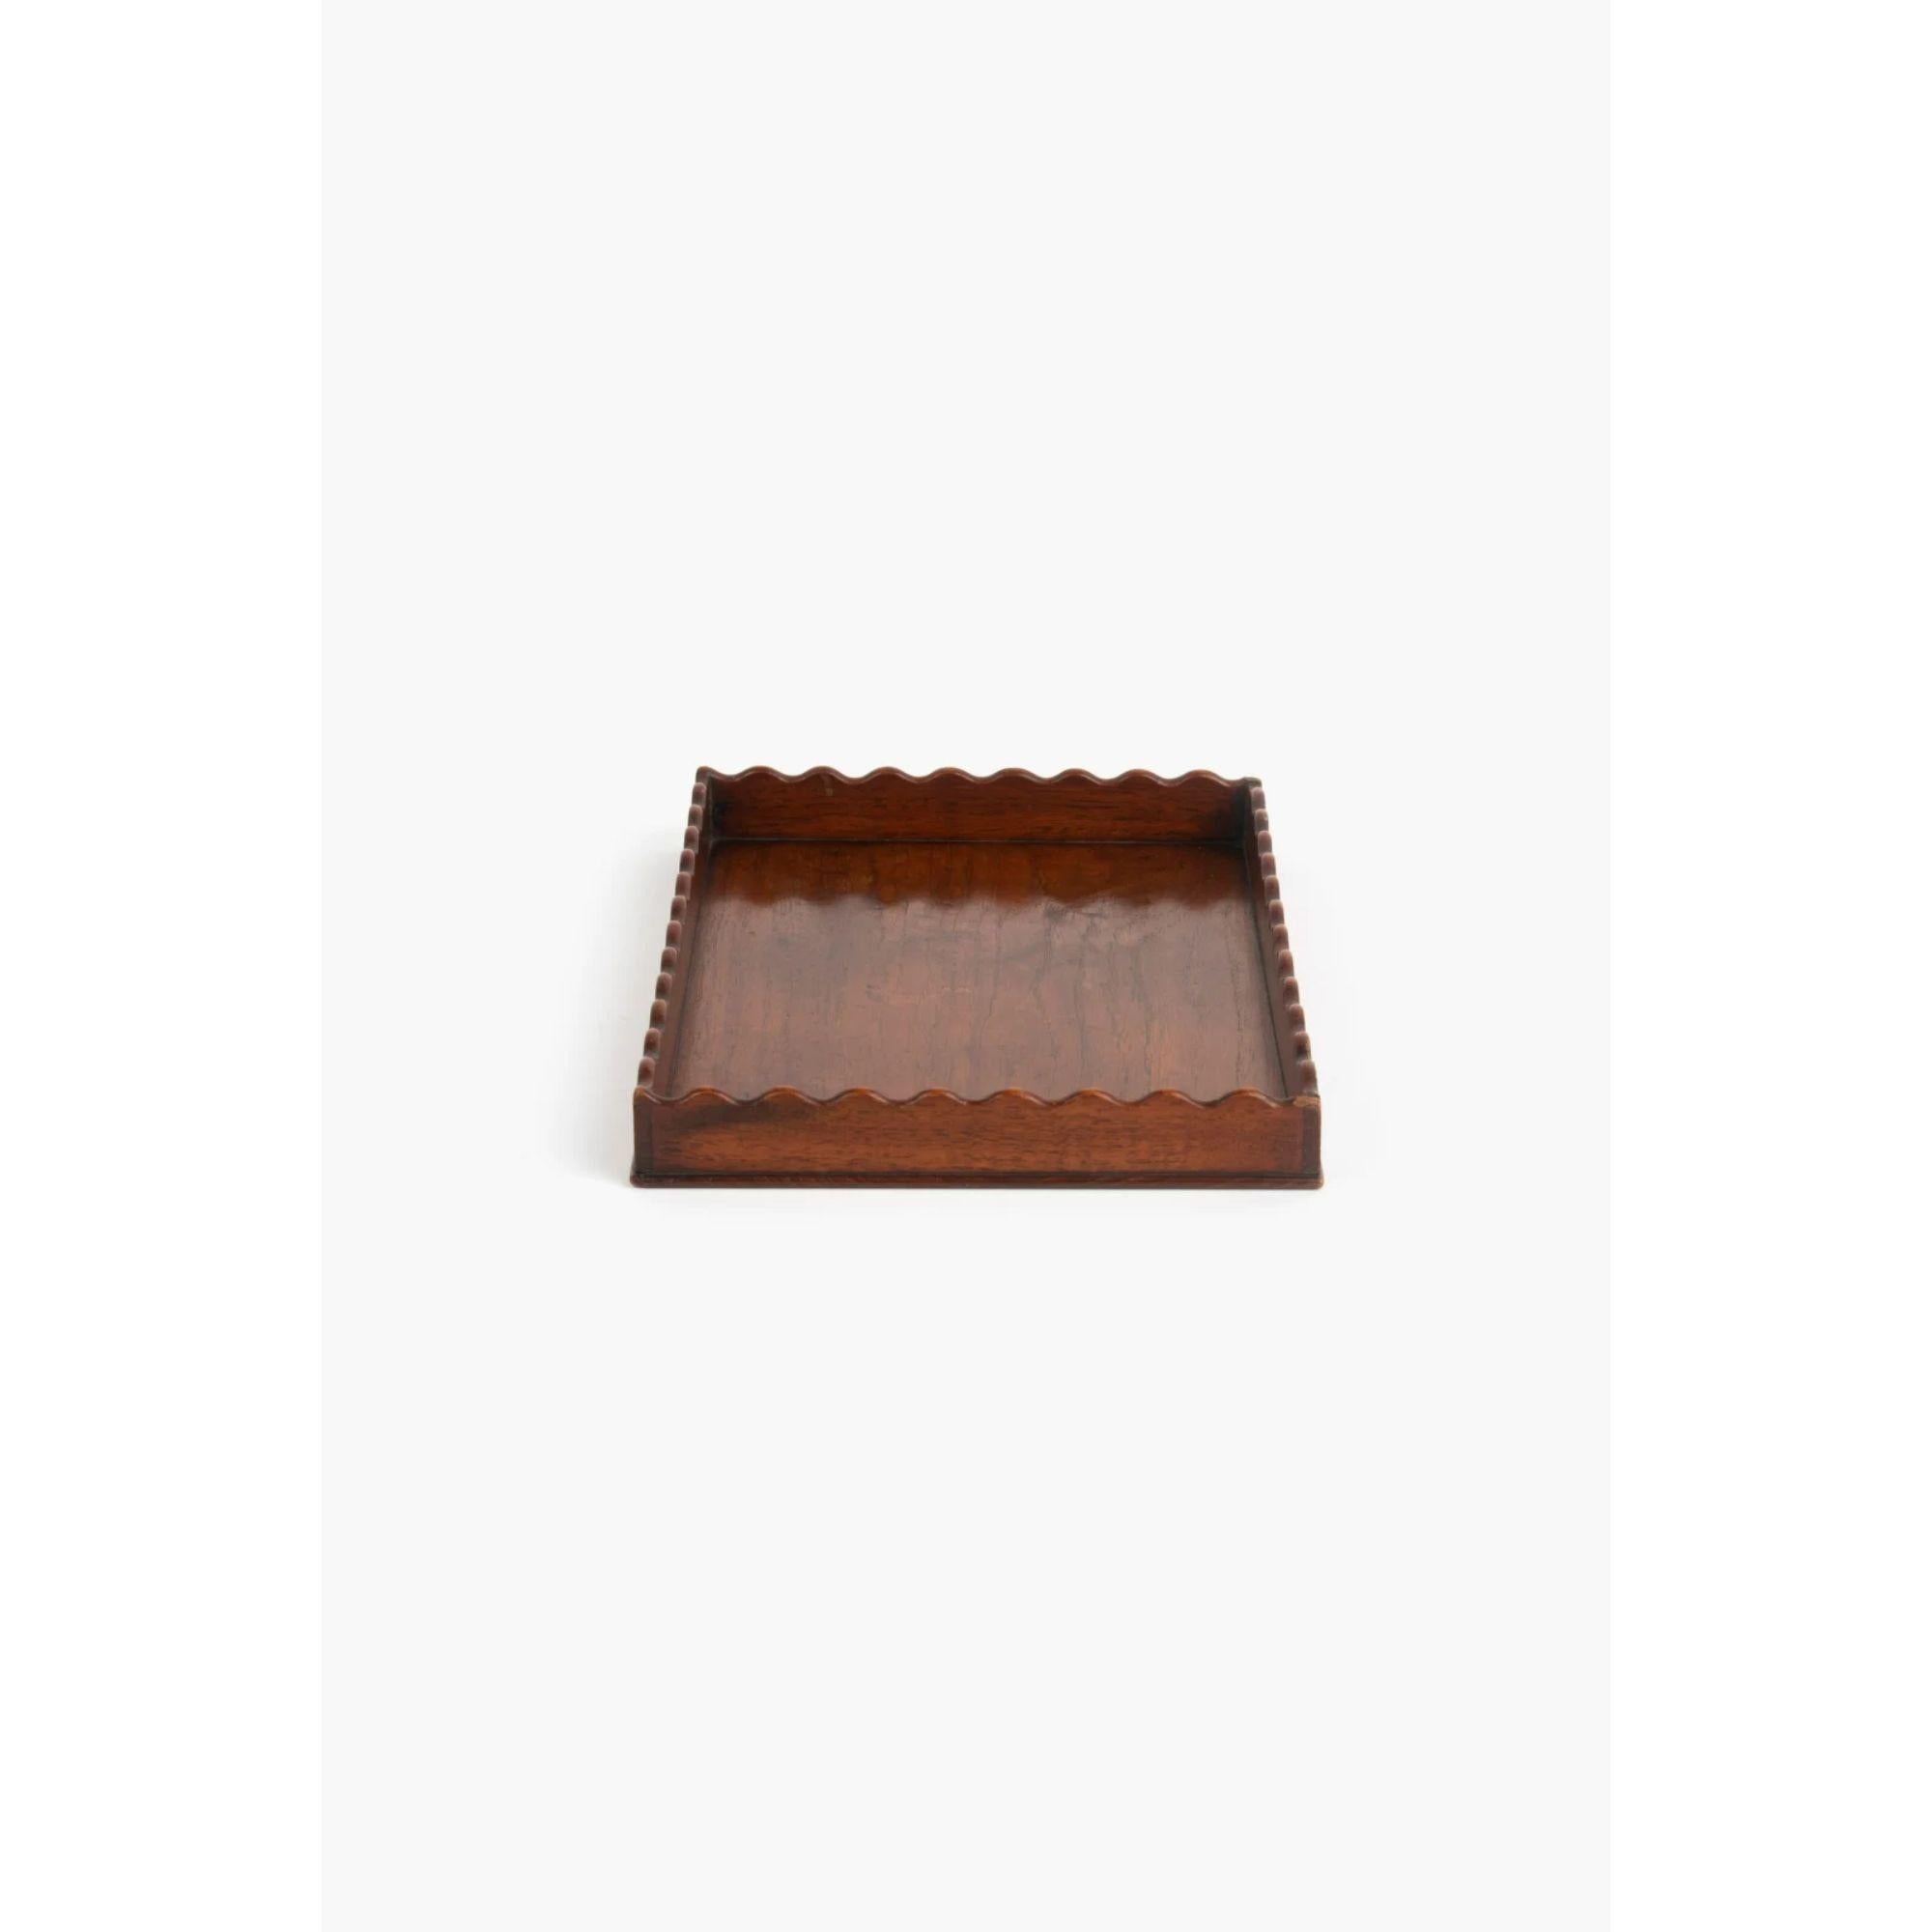 19th Century mahogany tray with scalloped detail.

Charming 19th Century mahogany tray with scalloped gallery sides.

Dimensions: 4 x 33 x 23 cm.